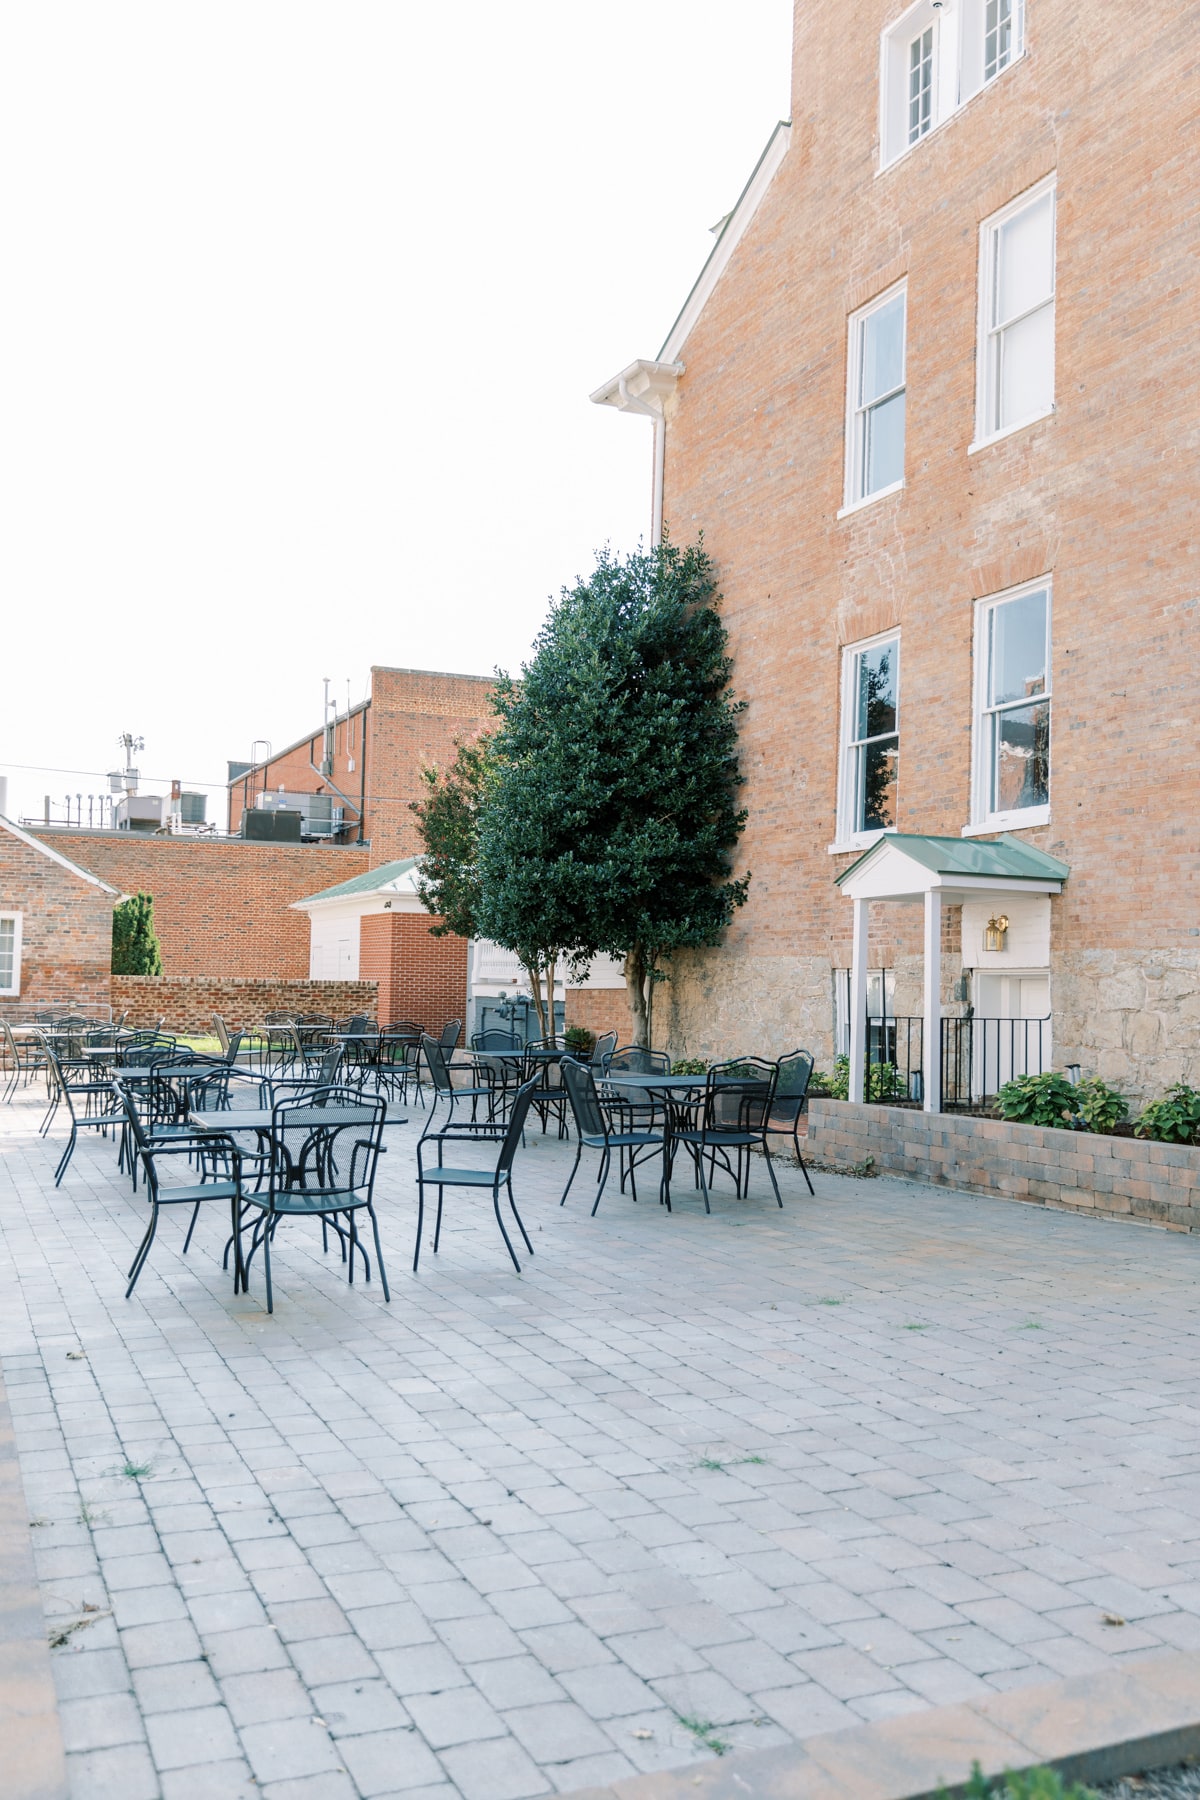 Patio area at a Winchester wedding venues